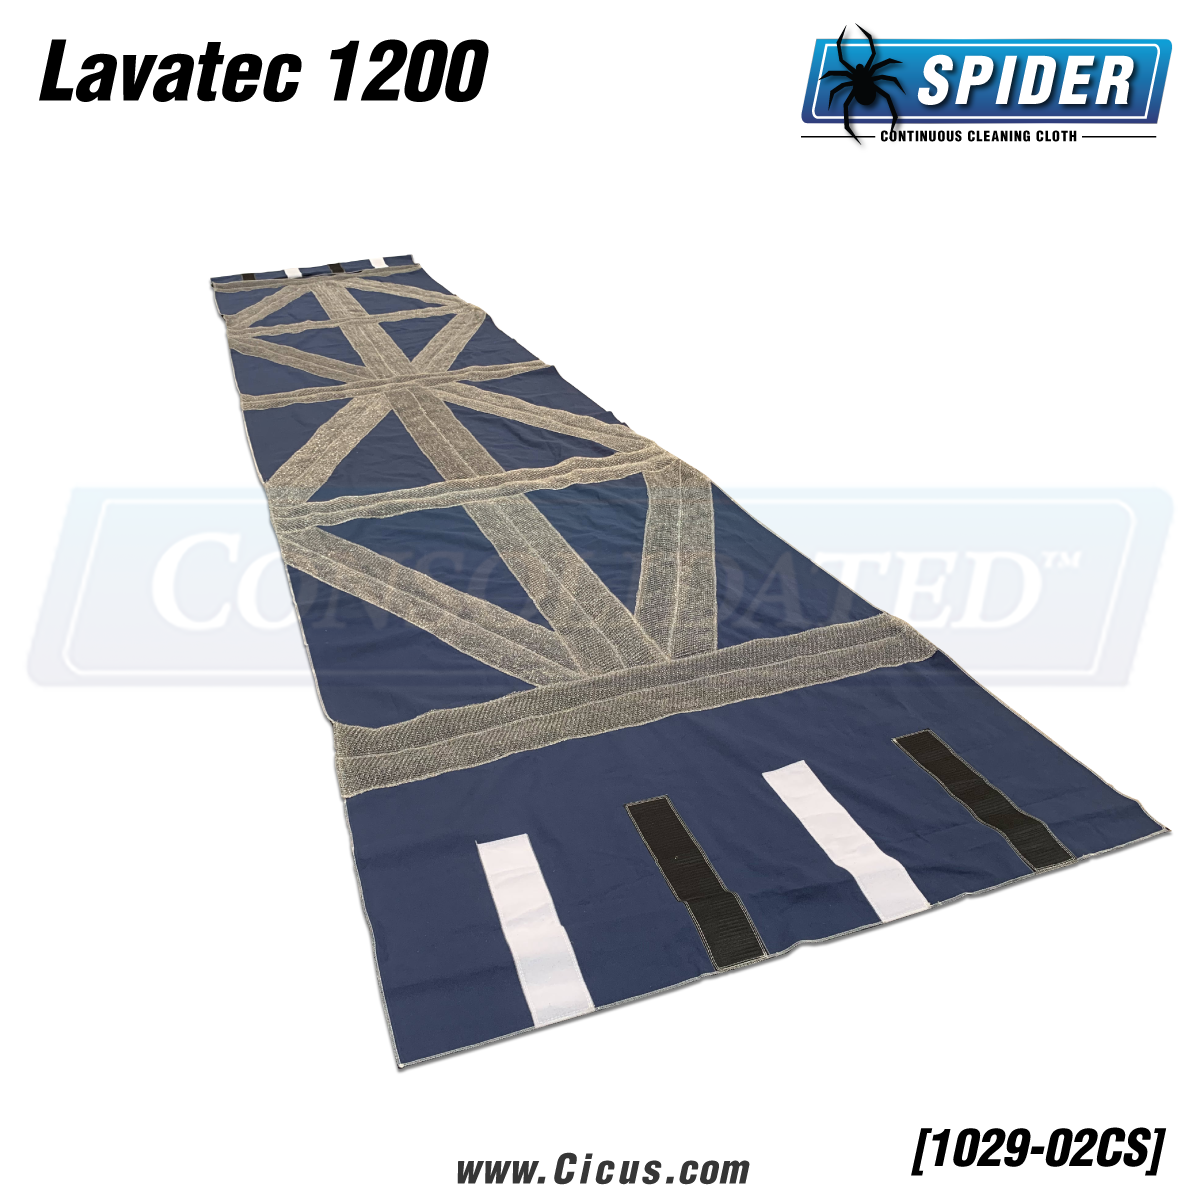 Coronet Spider Continuous Cleaning Cloth Compatible with Lavatec 1200